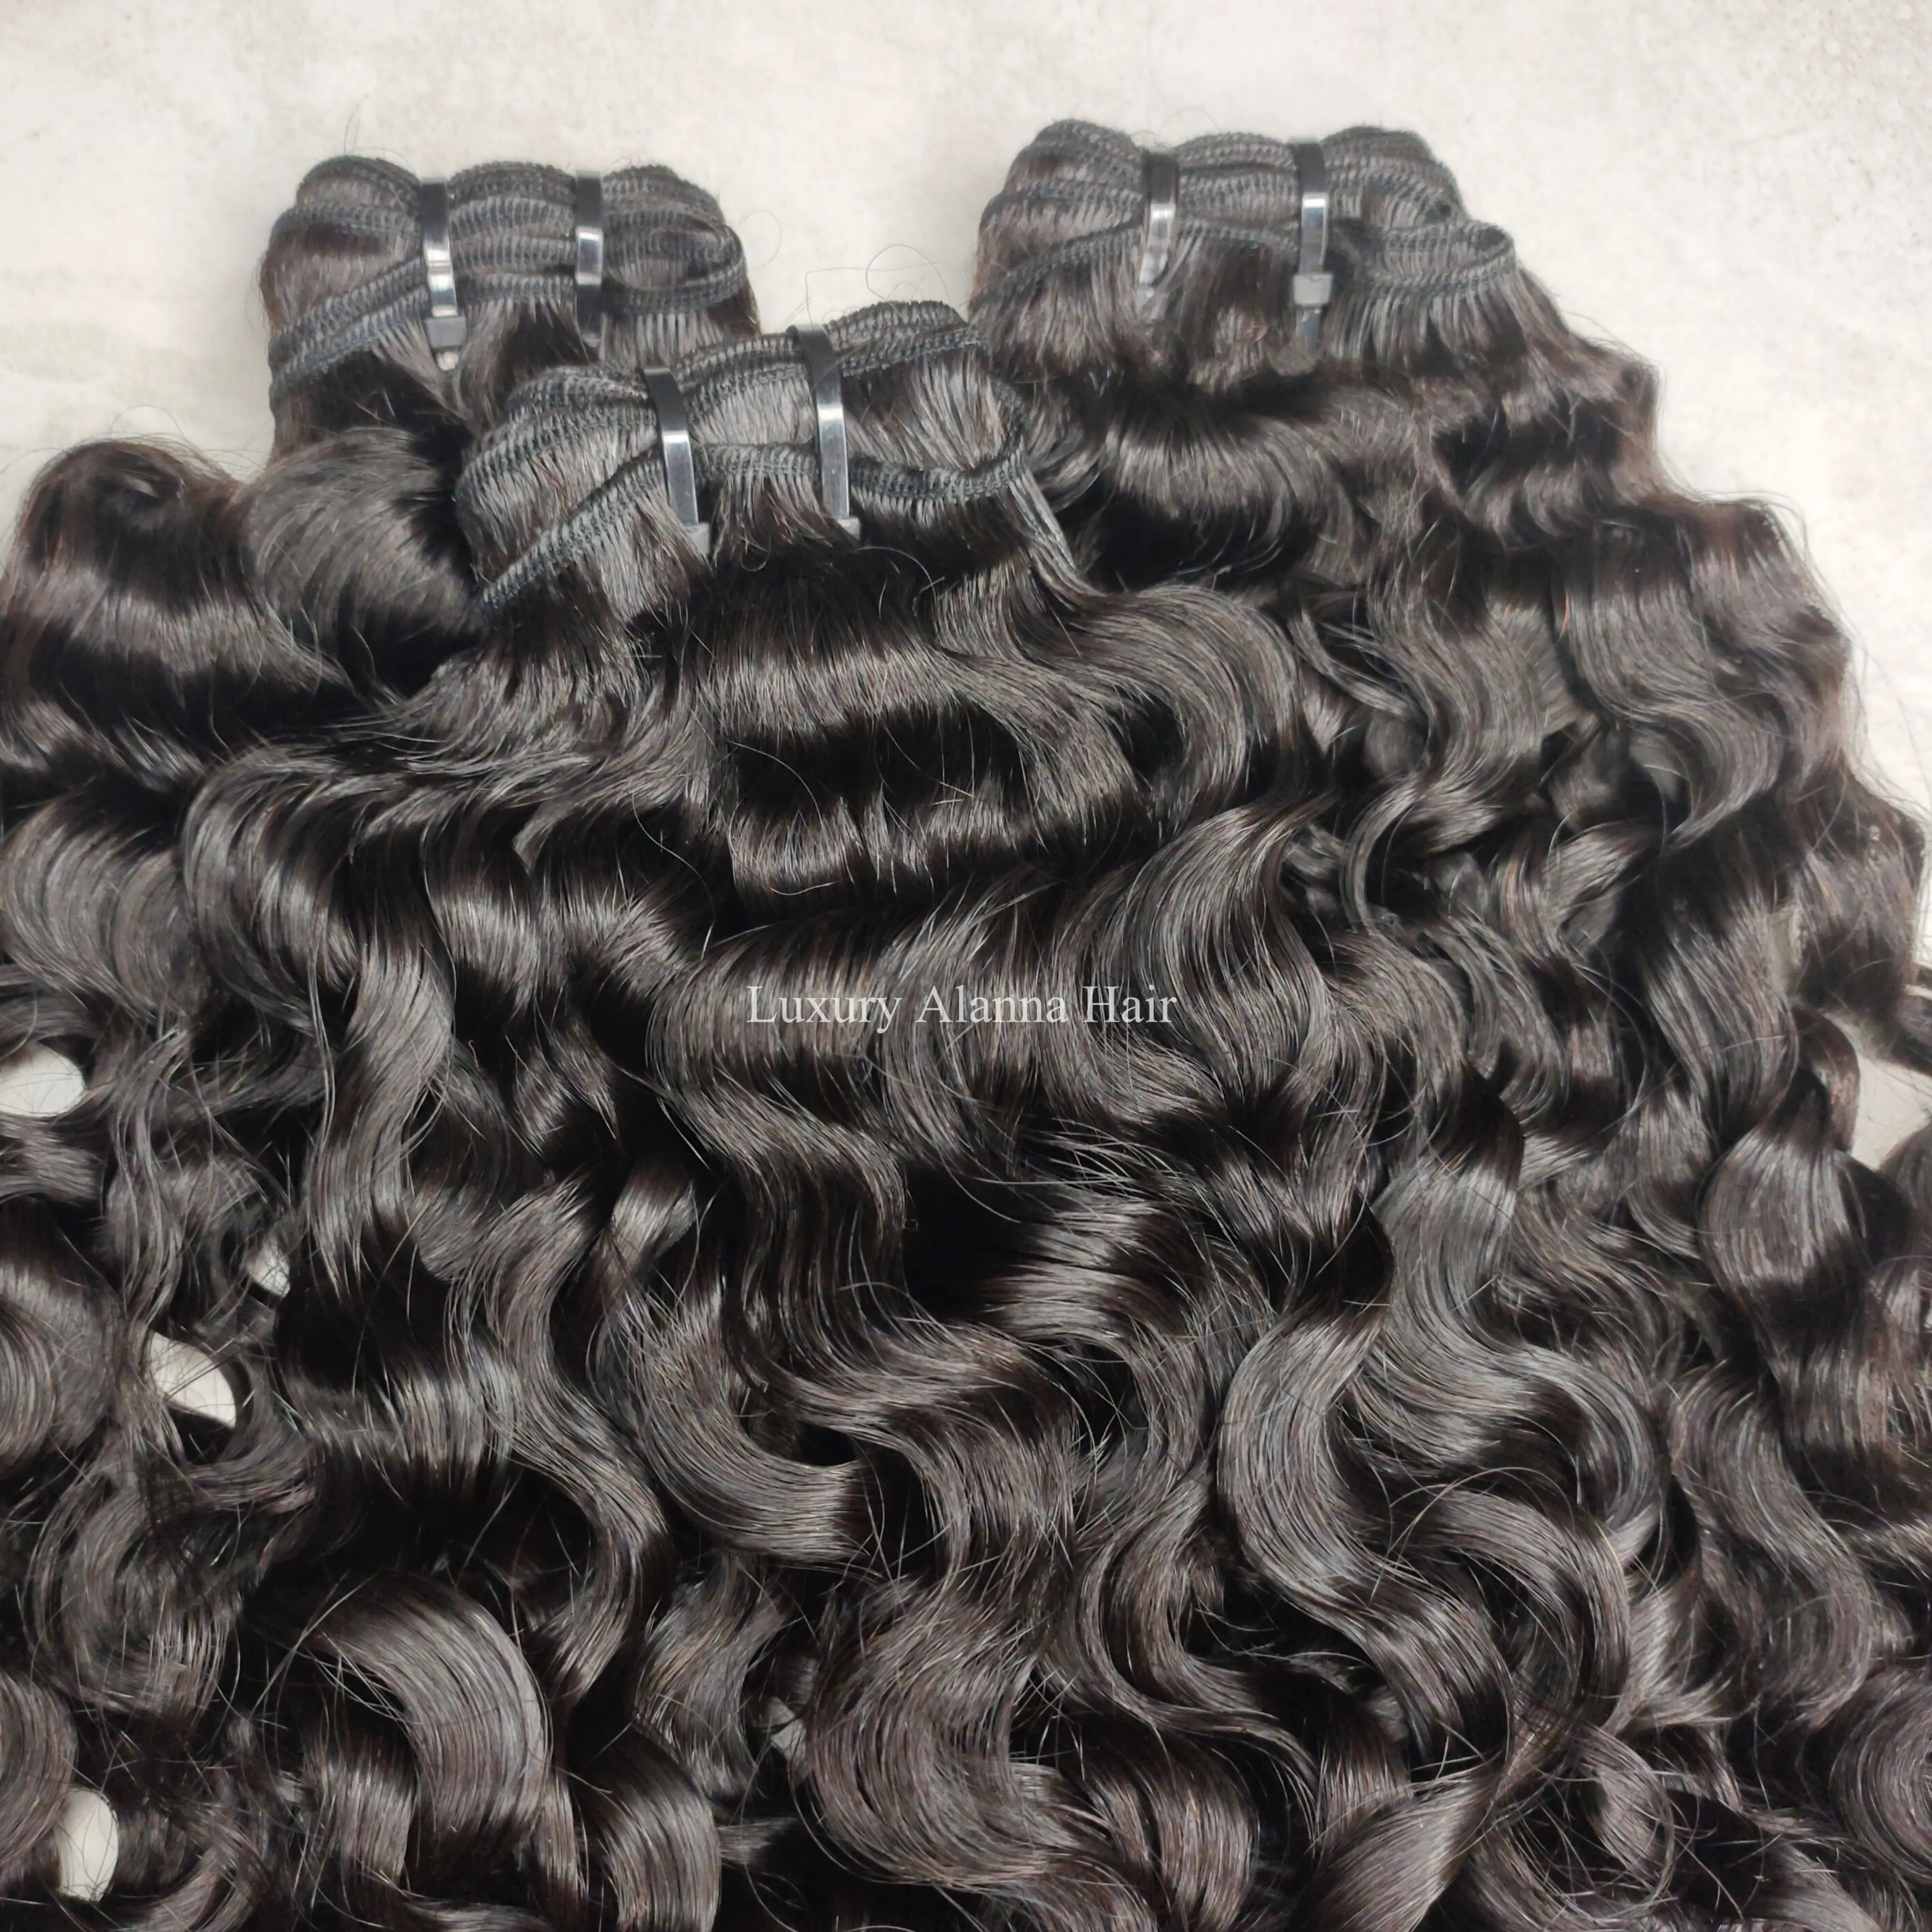 Raw Cambodian Hair Unprocessed Virgin One And Only Customized Raw Cambodian Loose Deep Wavy Curly Human Hair Bundles